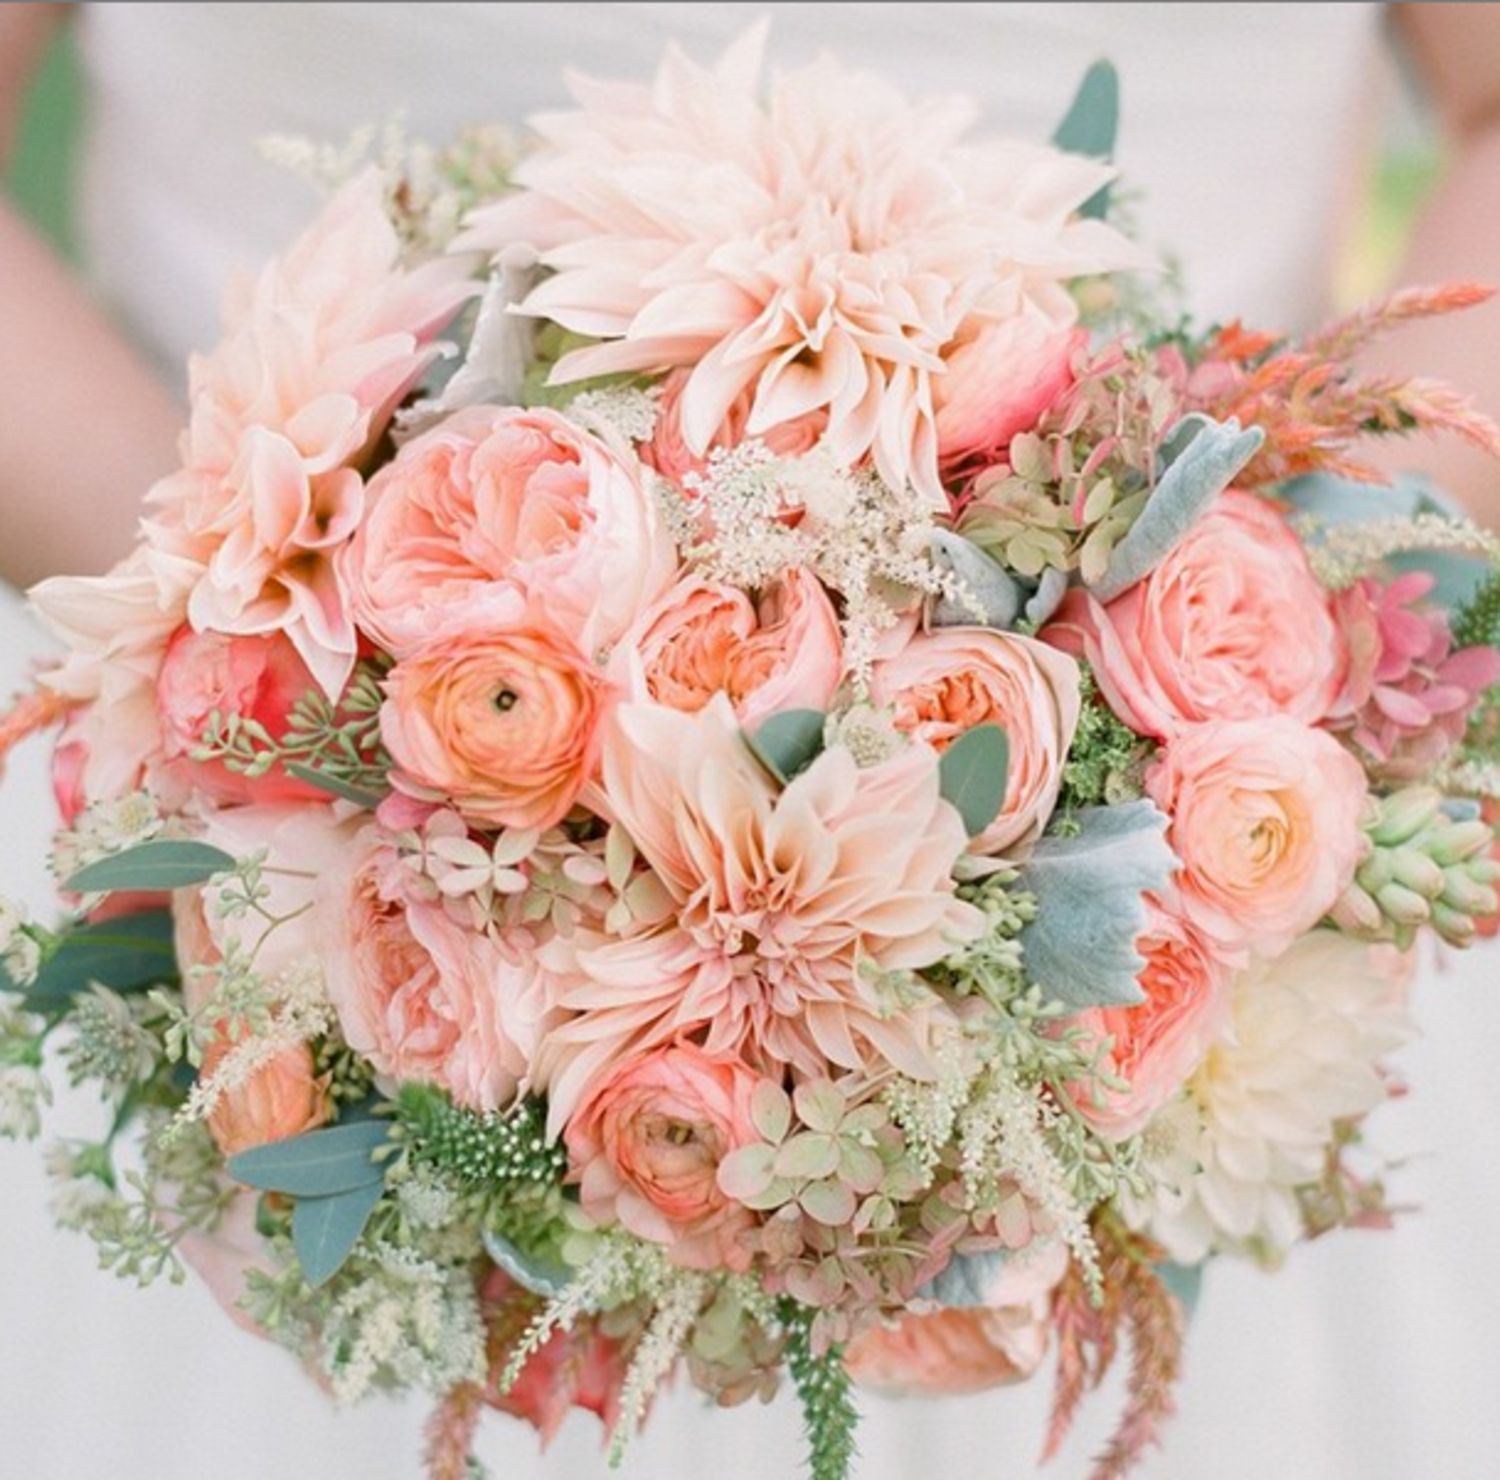 Popular Flowers For Weddings
 Best Wedding Flowers 13 Gorgeous Bridal Bouquets in Every